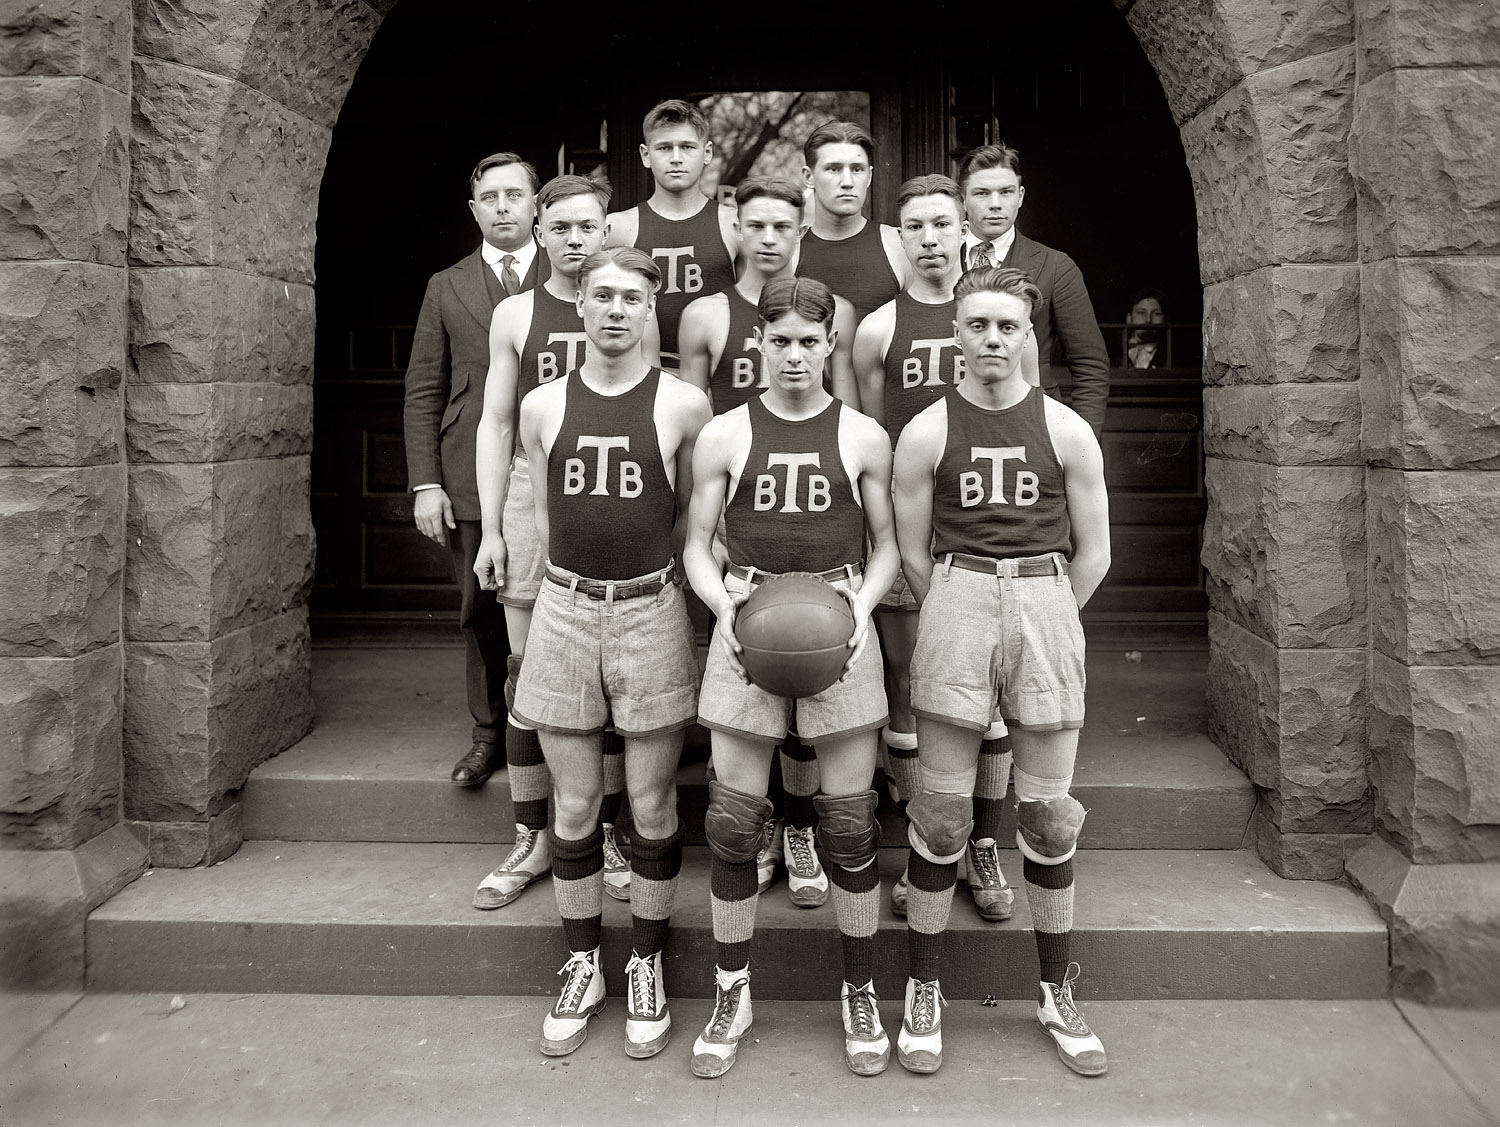 Washington, D.C. "Tech High basketball team, 1920." View full size. National Photo Company Collection glass negative, Library of Congress.